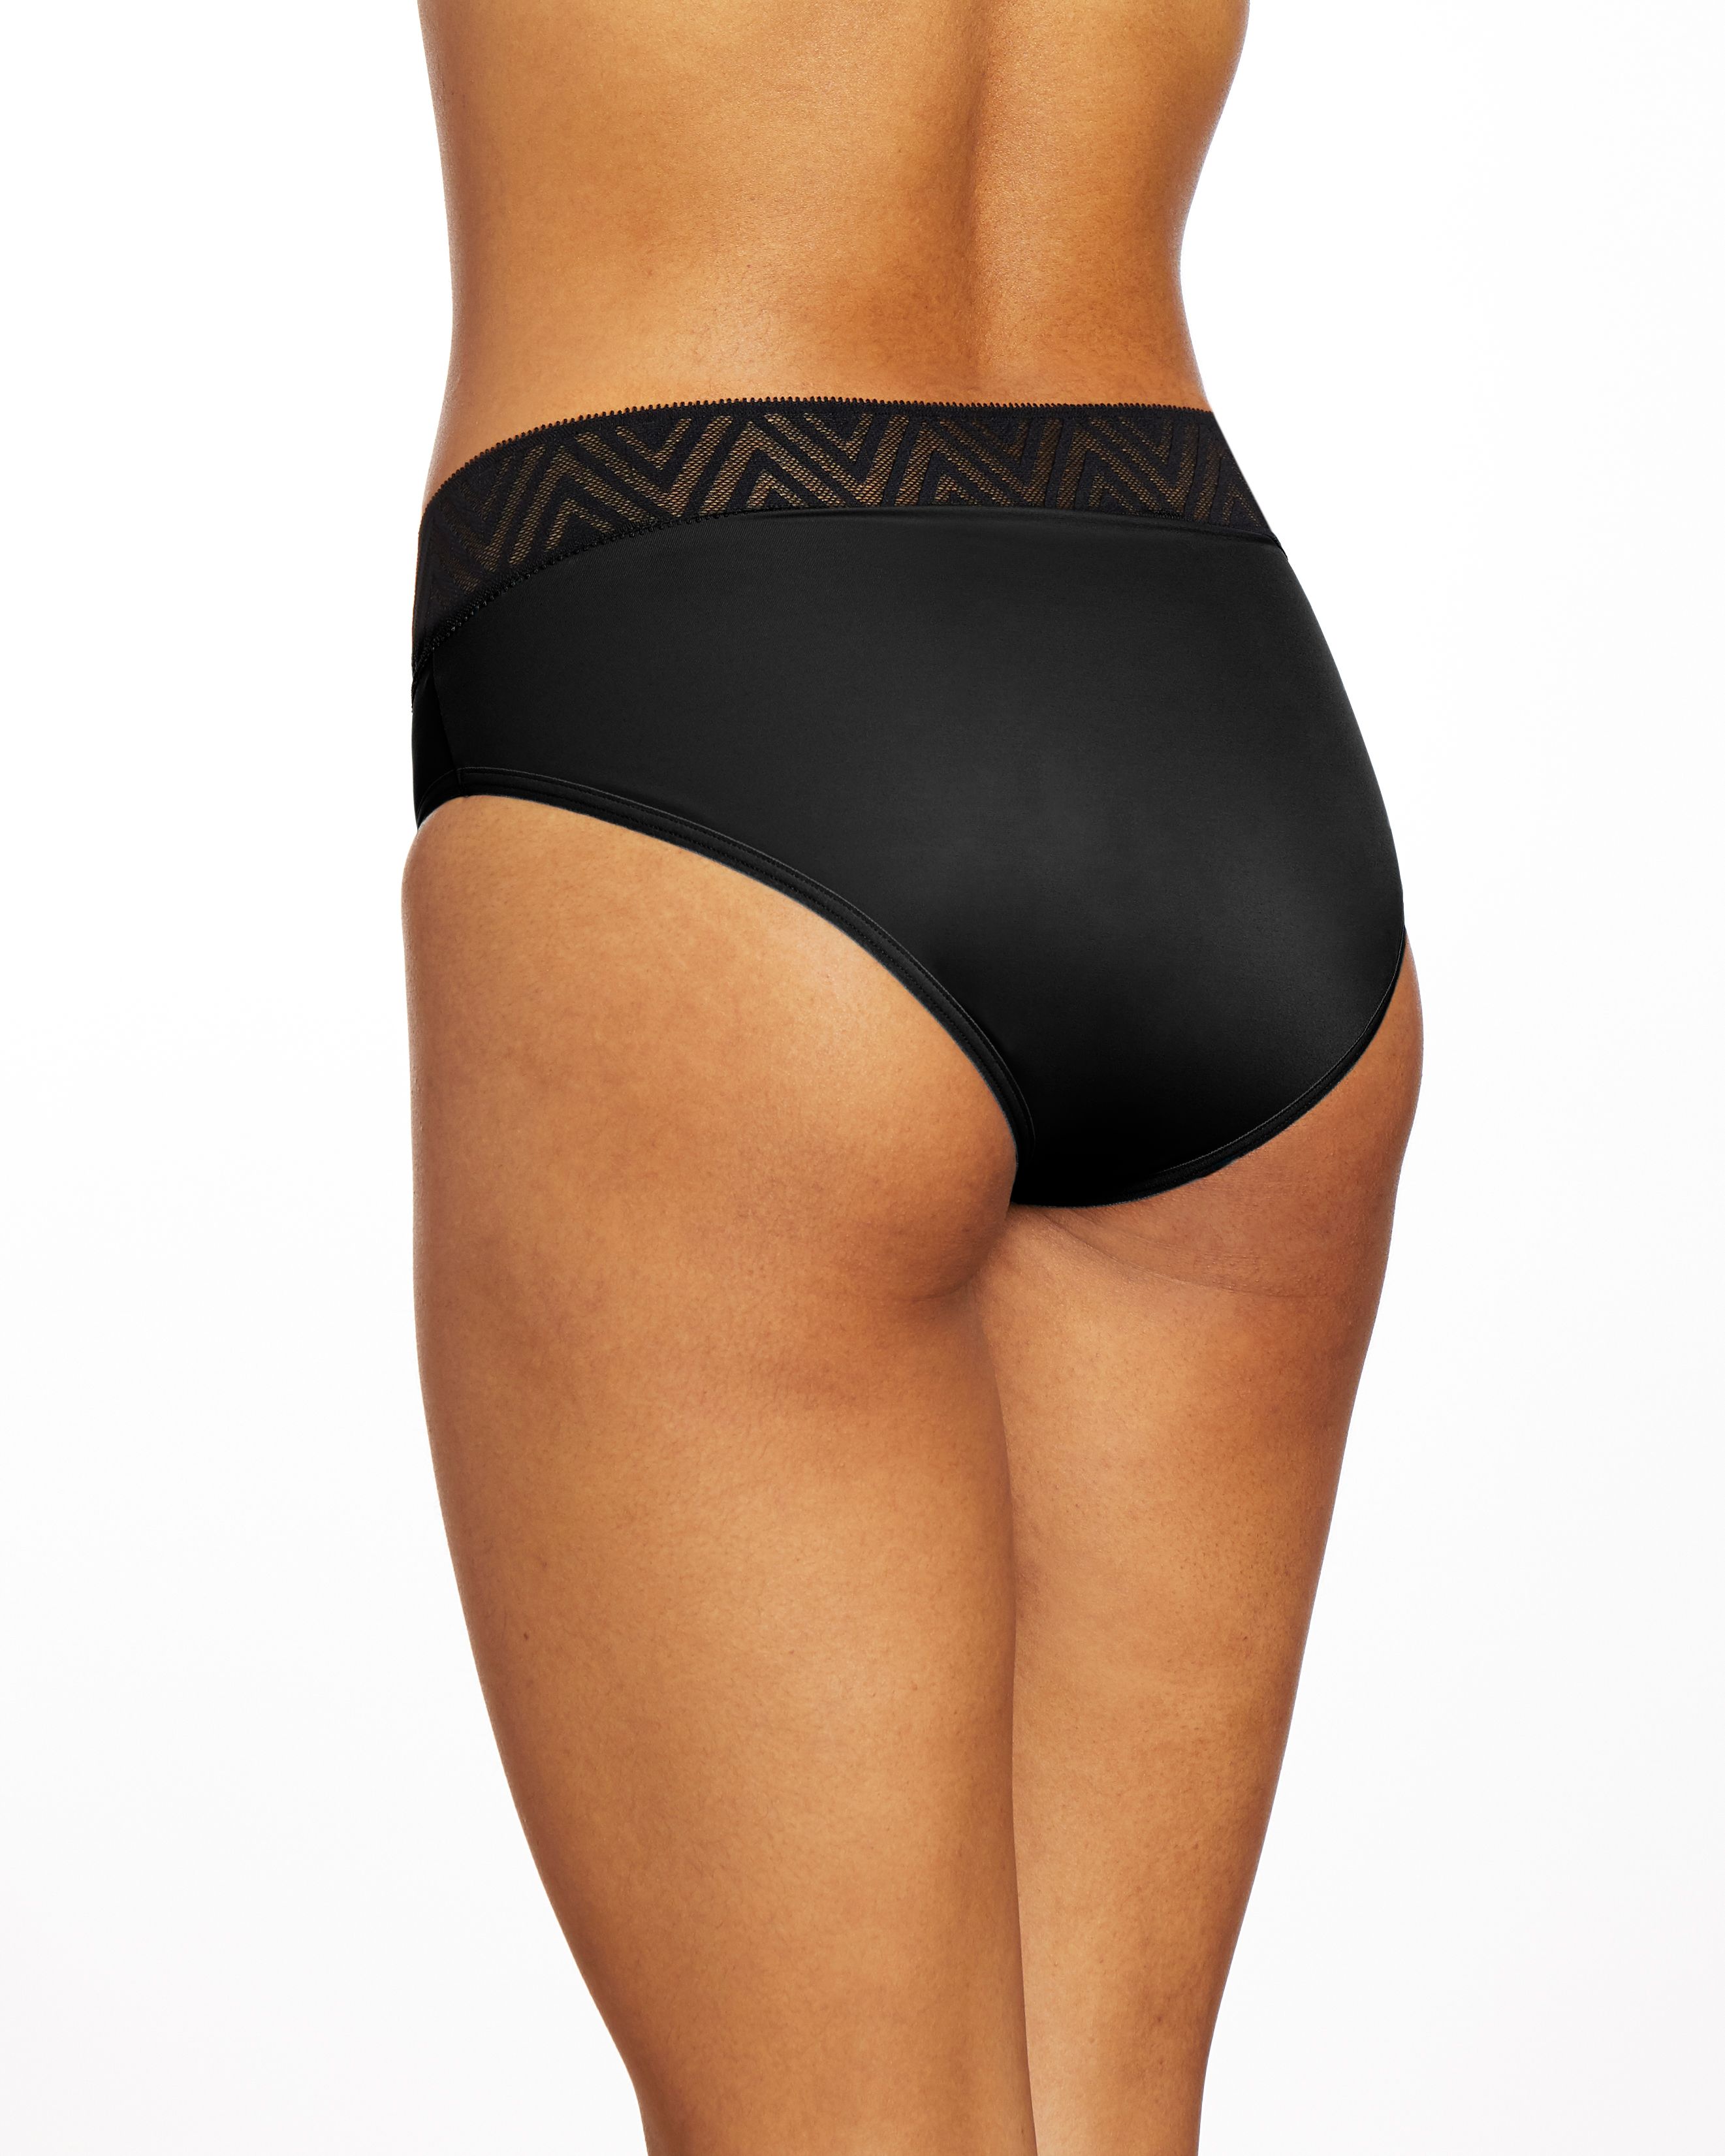 DISCThinx Period Proof Hiphugger Black - L (New Geo Lace)